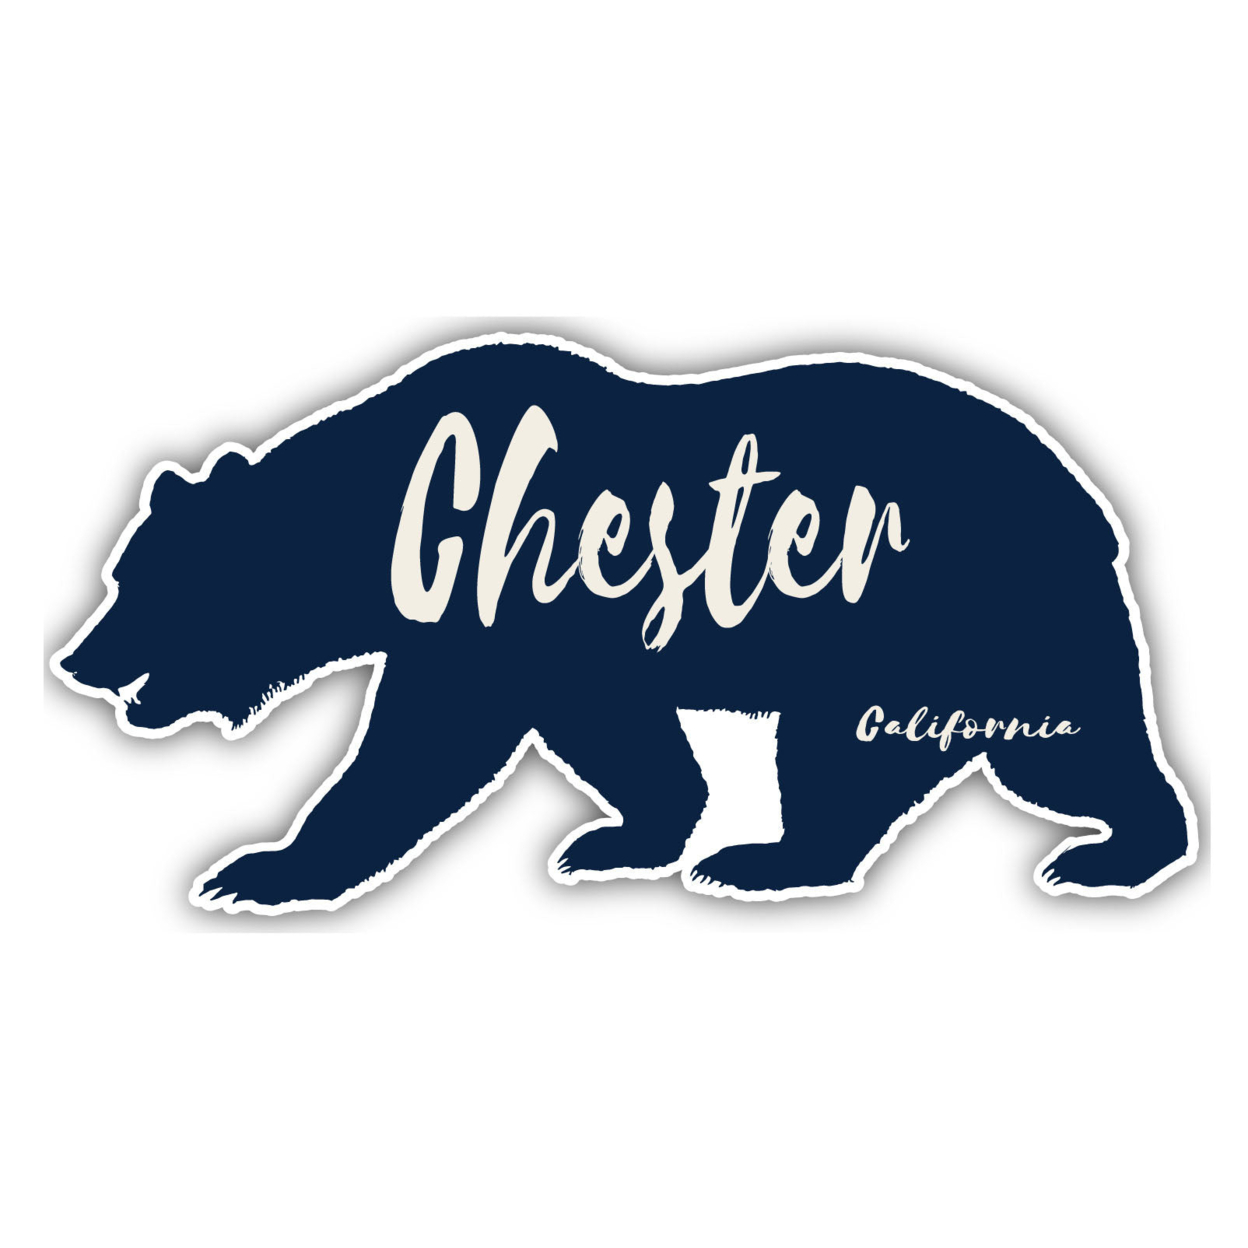 Chester California Souvenir Decorative Stickers (Choose Theme And Size) - Single Unit, 4-Inch, Great Outdoors